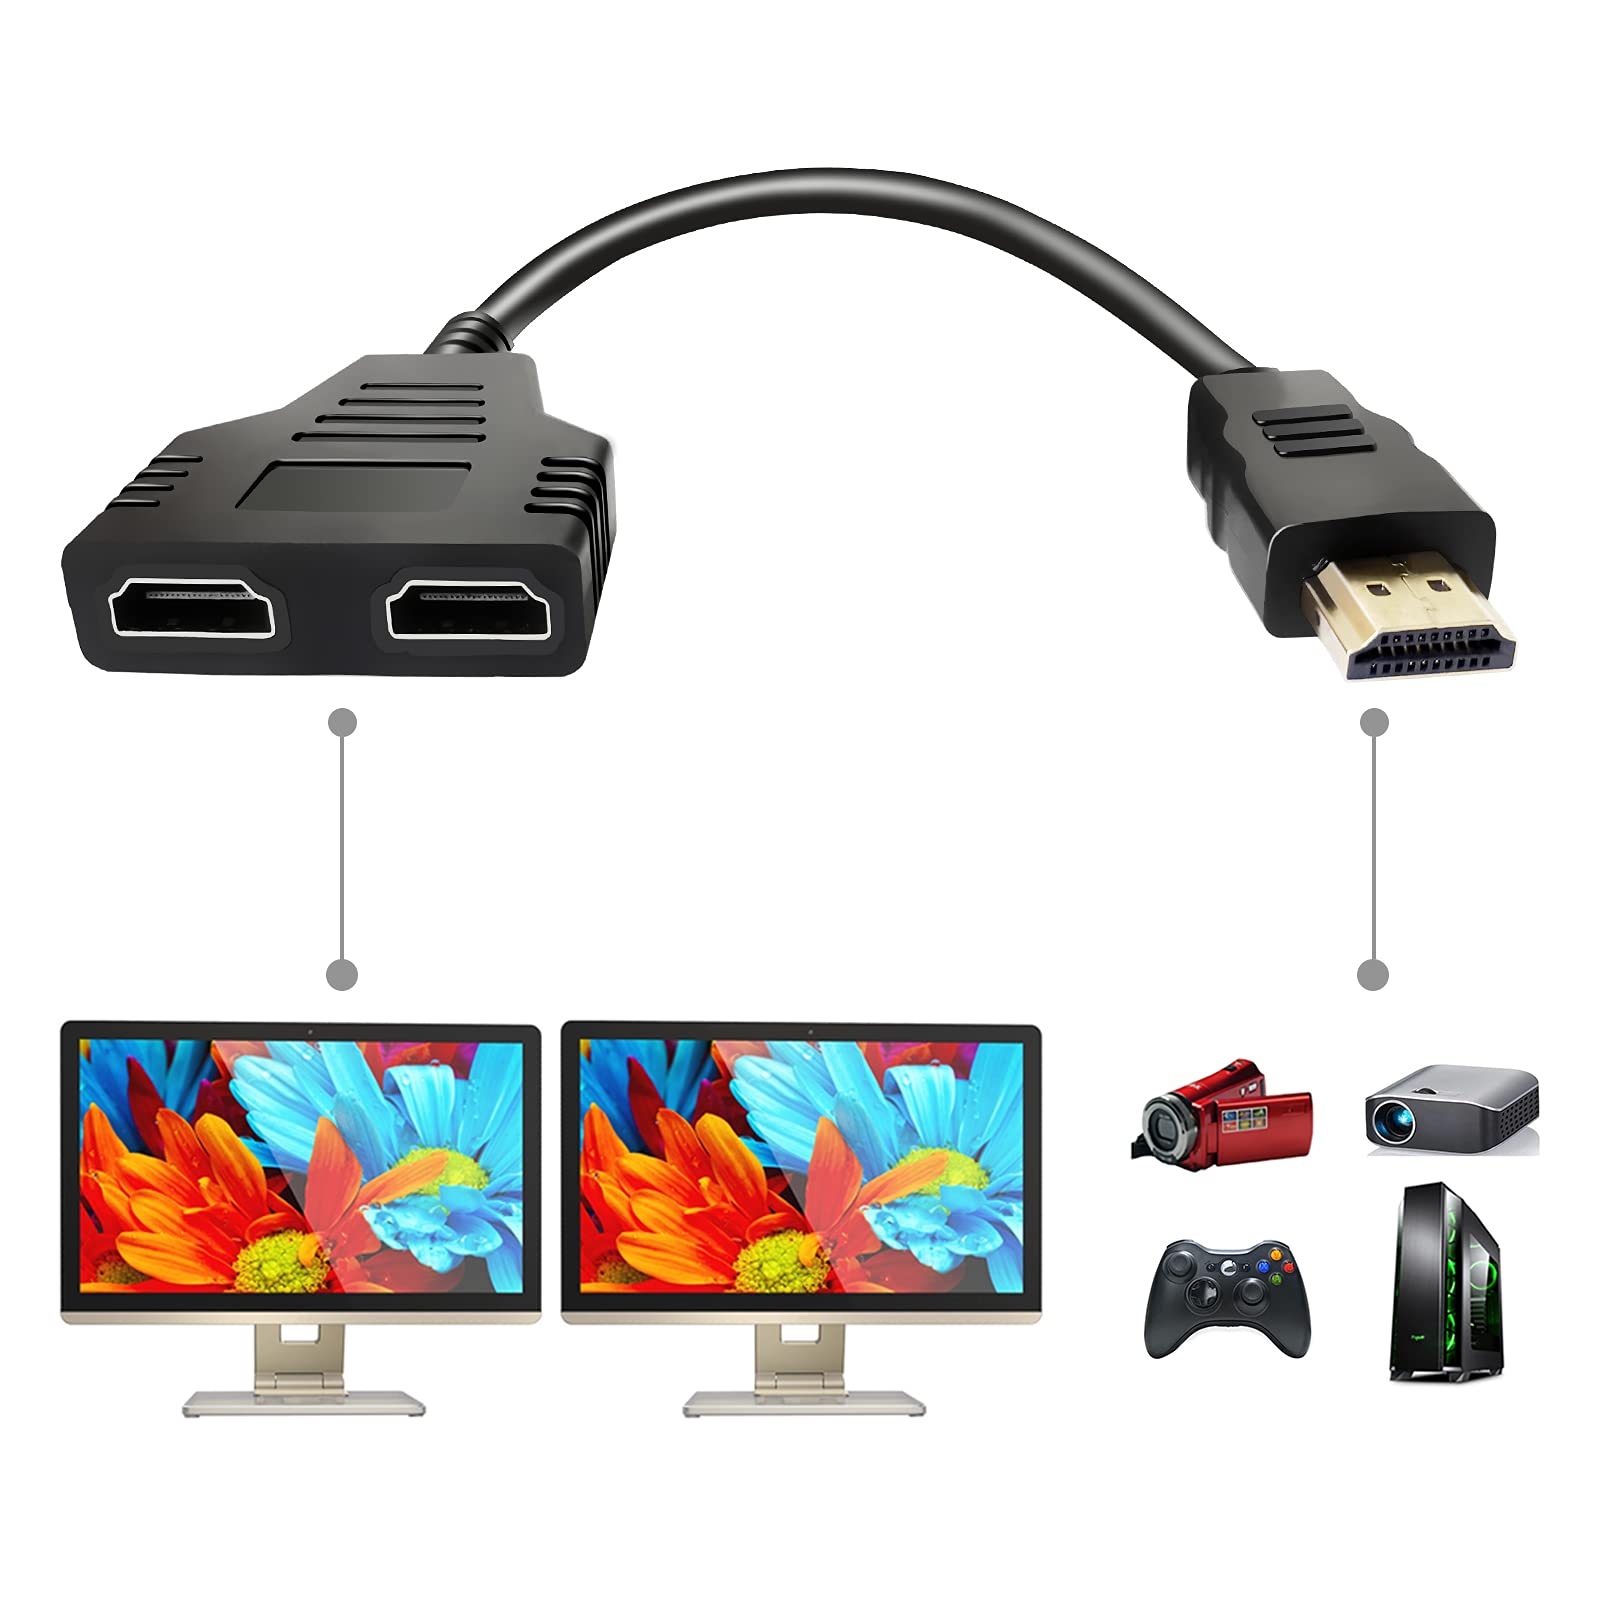 Use the same HDMI cable to connect a different device (such as a gaming console or Blu-ray player) to the original monitor
Check if the original monitor is turned on and set to the correct input source